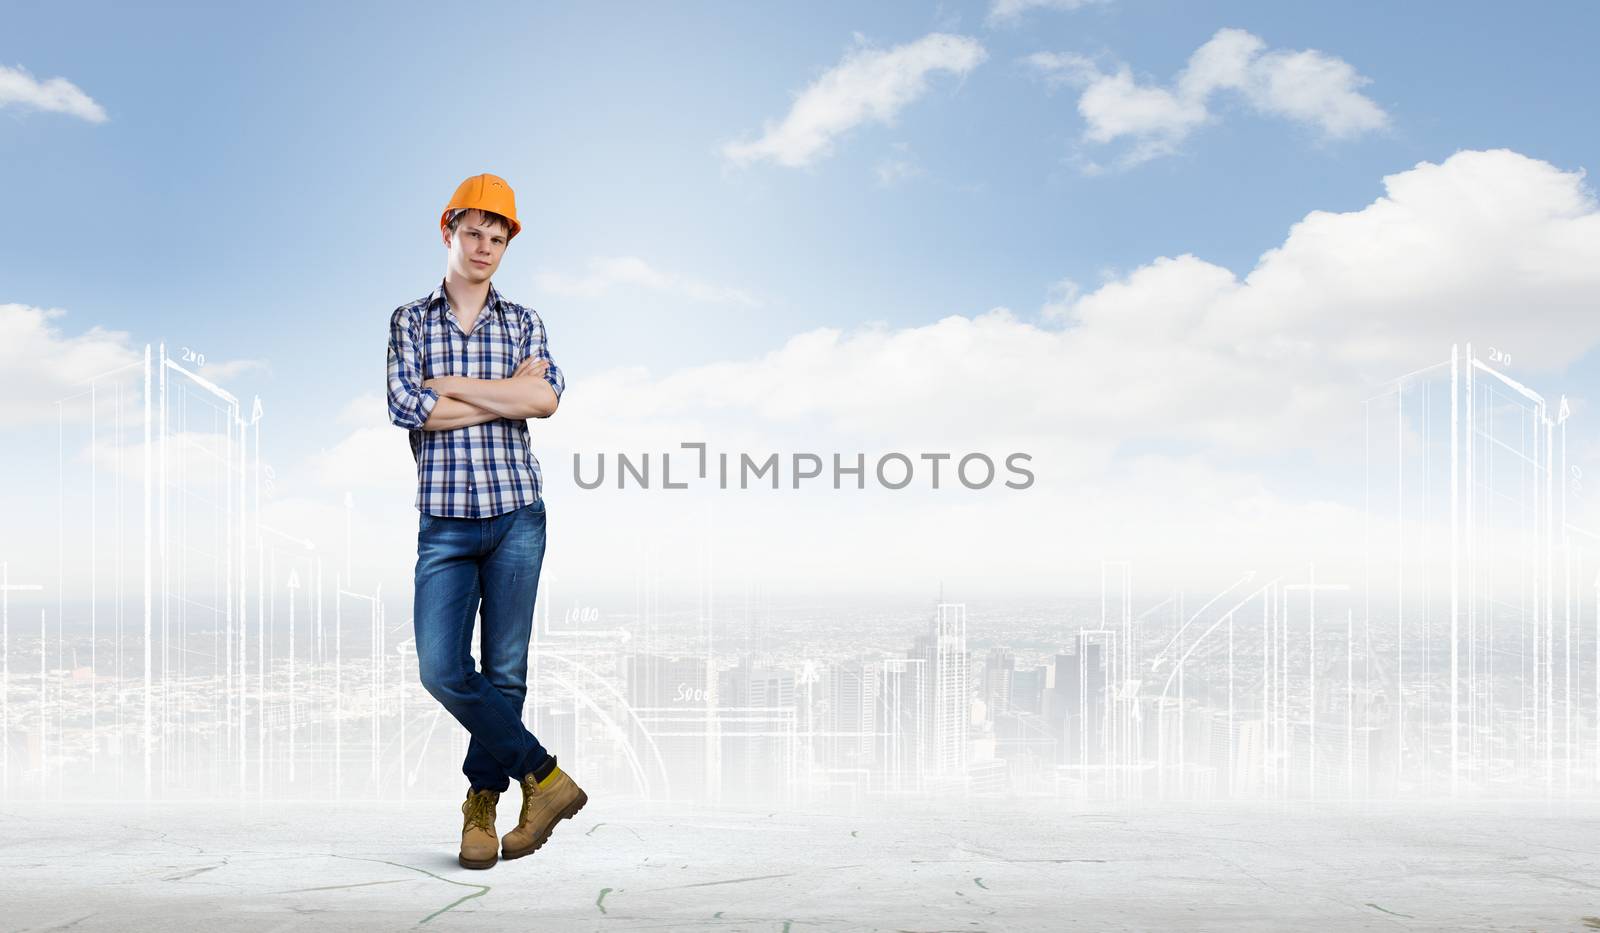 Image of man builder with arms crossed on chest against urban scene